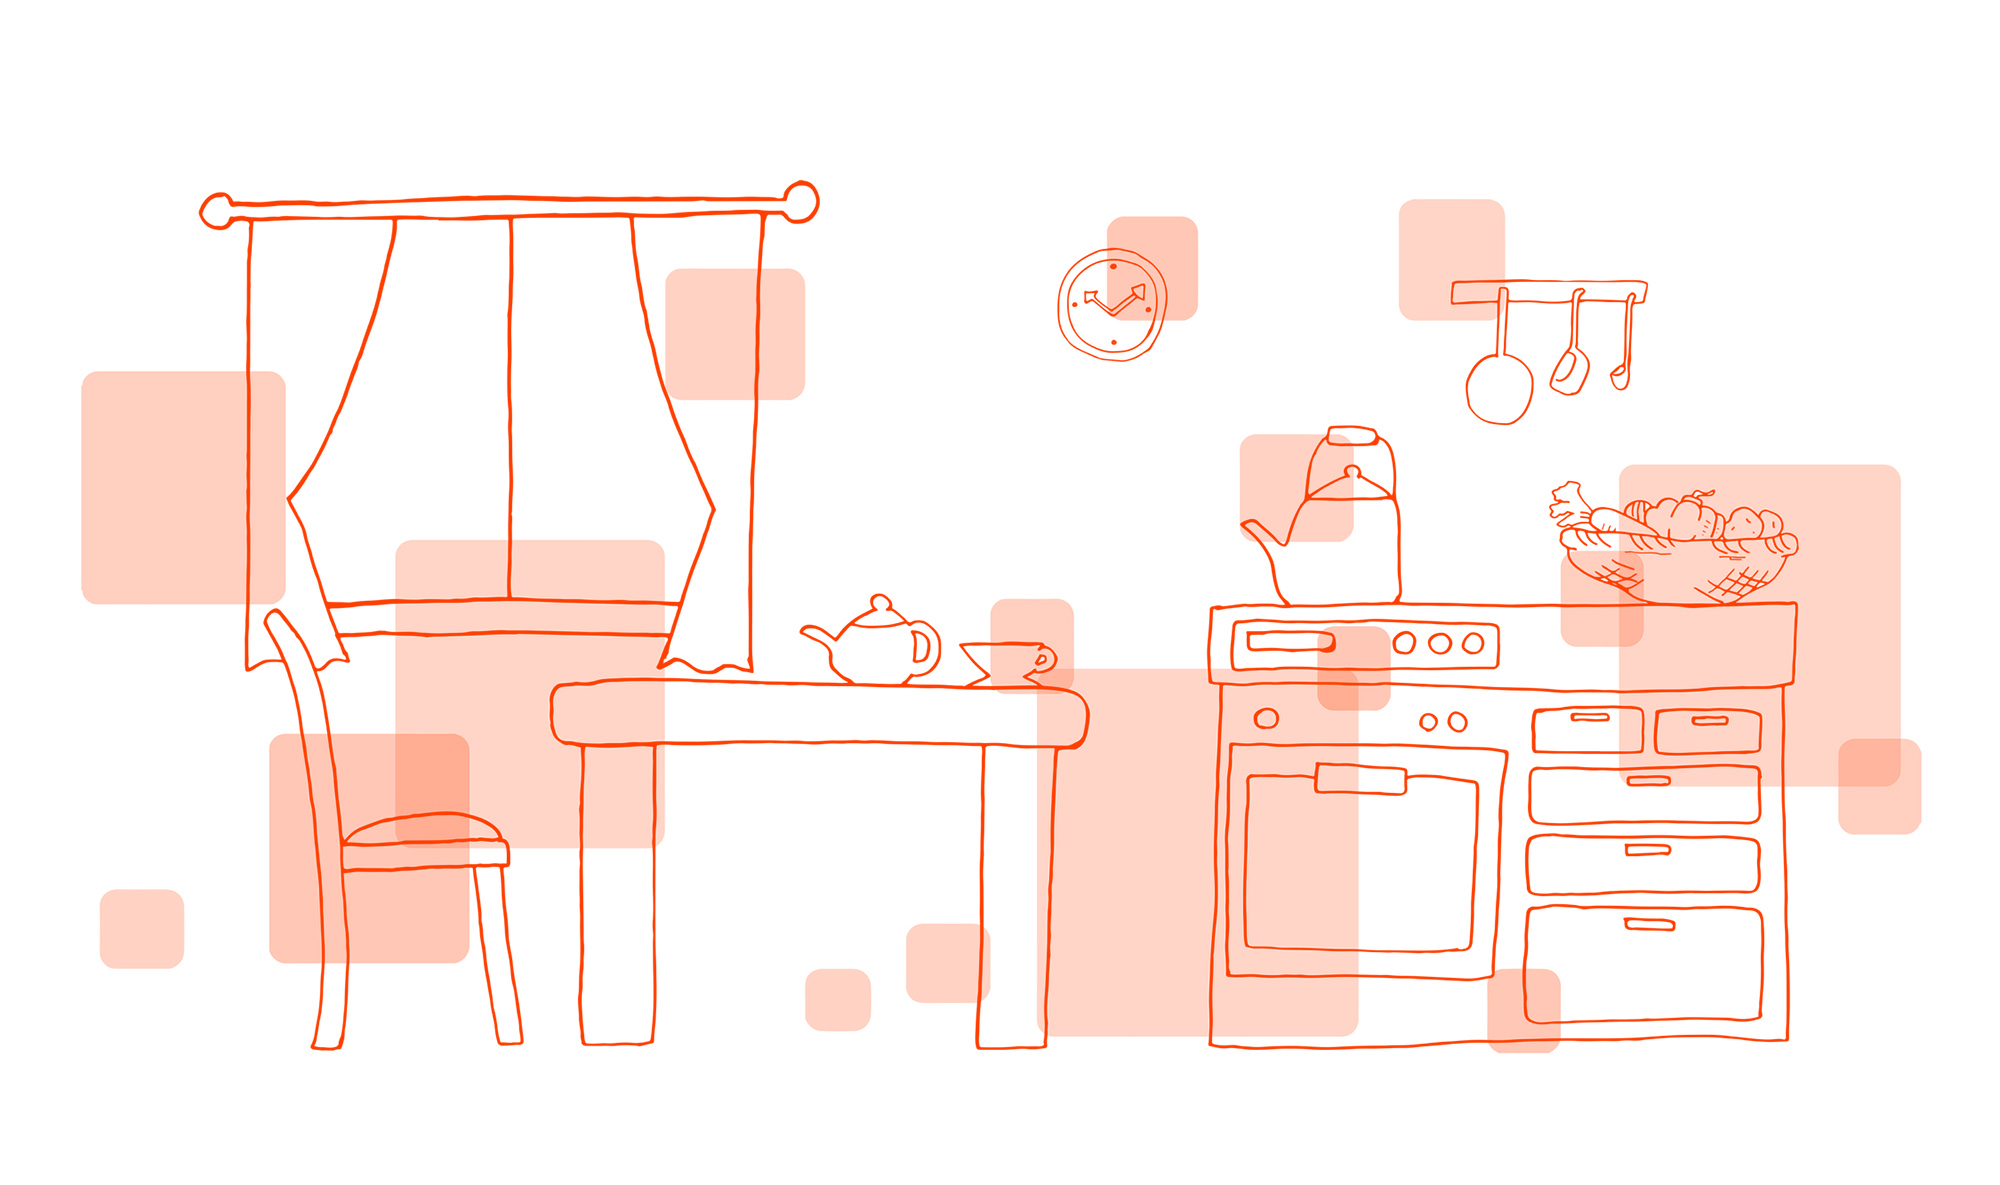 Drawing of a kitchen